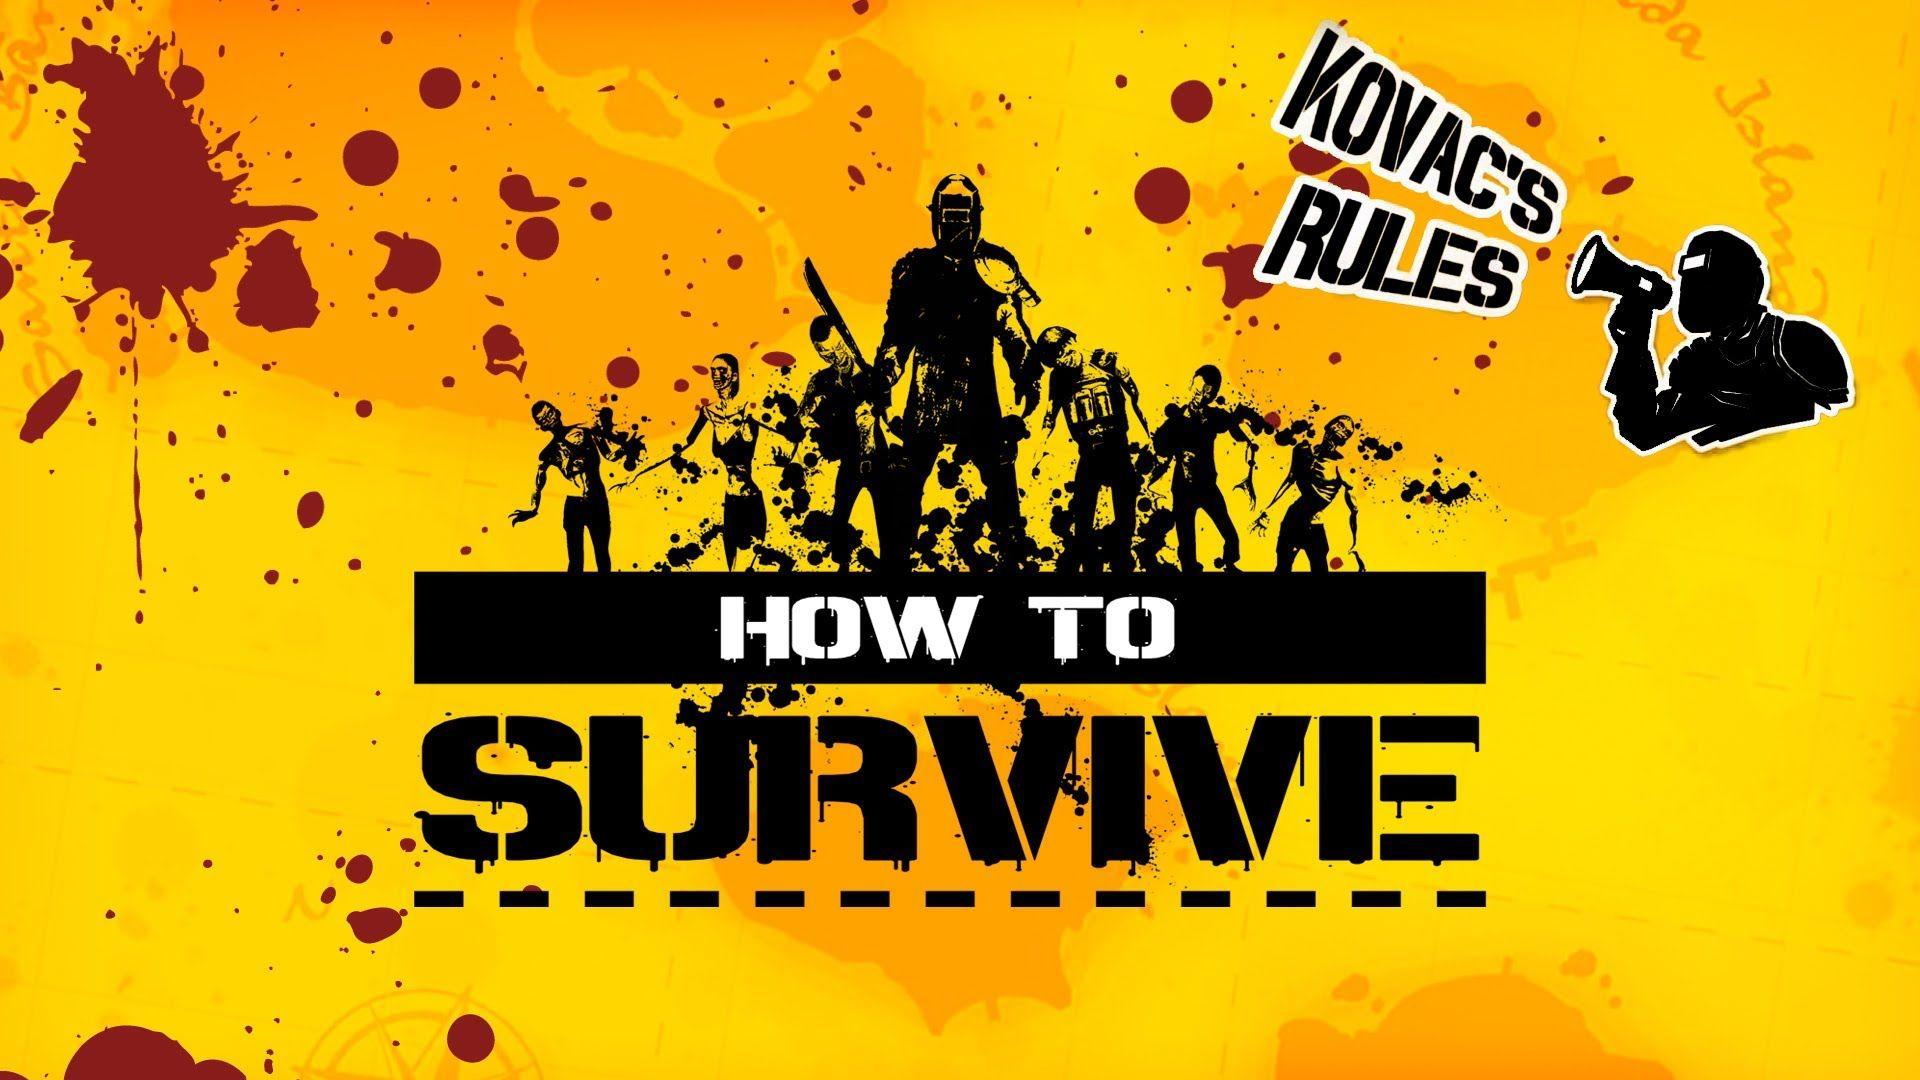 Survival Rules of App Logo - RULES OF SURVIVAL Wallpaper